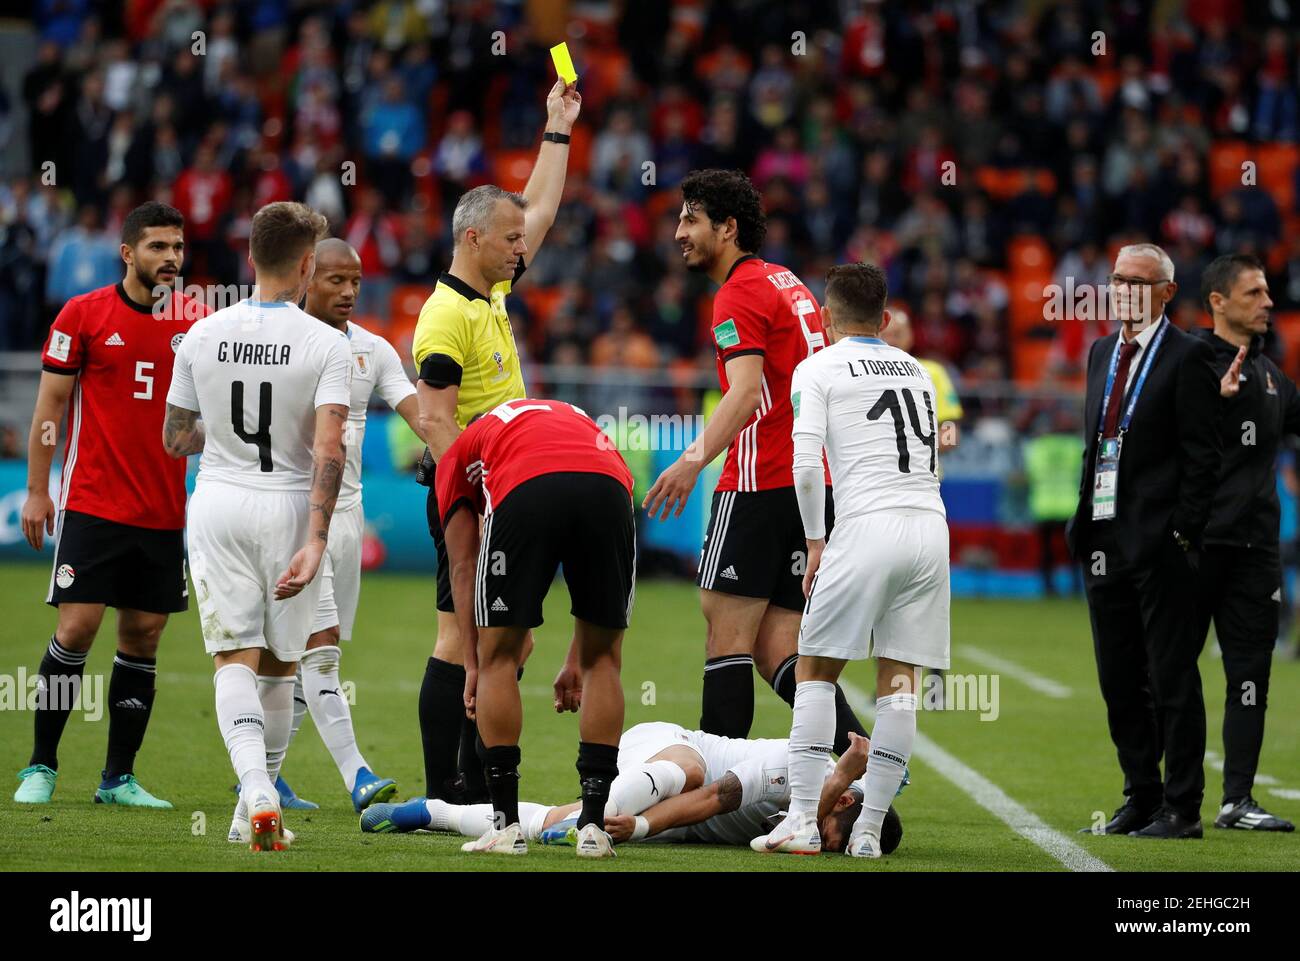 Soccer Football - World Cup - Group A - Egypt vs Uruguay - Ekaterinburg Arena, Yekaterinburg, Russia - June 15, 2018   Egypt's Ahmed Hegazi is shown a yellow card by referee Bjorn Kuipers after a challenge on Uruguay's Luis Suarez     REUTERS/Damir Sagolj Stock Photo